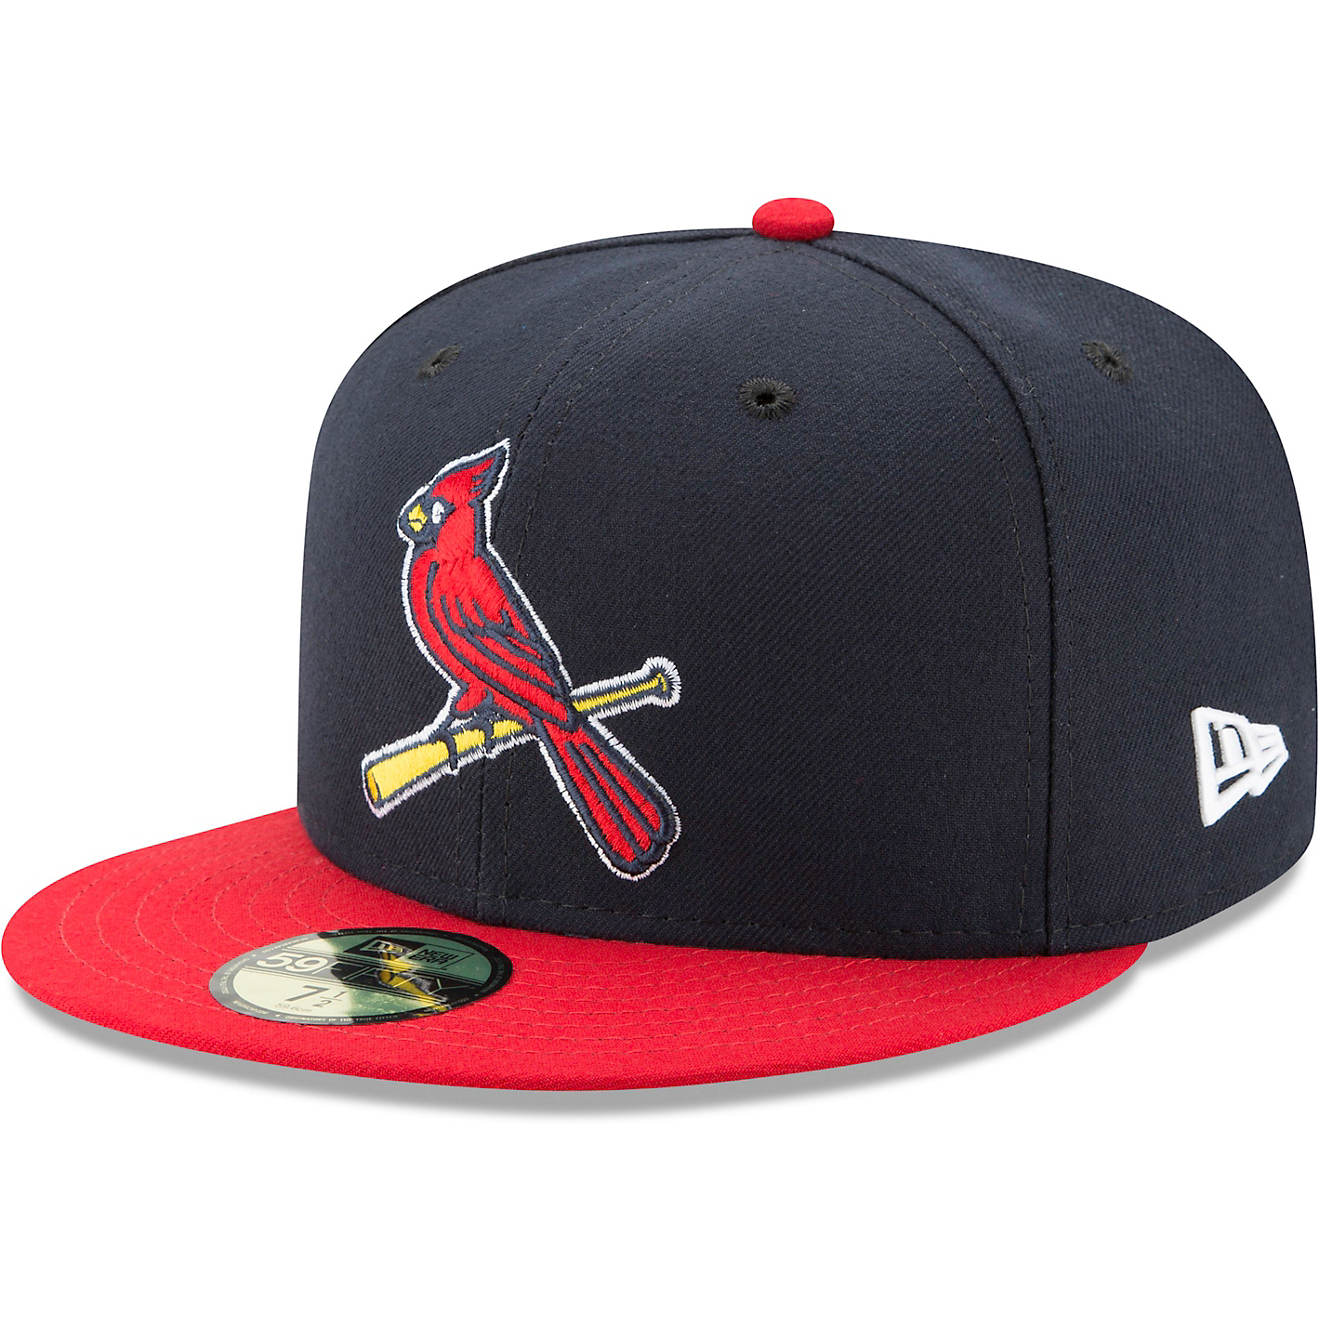 New Era Men's St. Louis Cardinals Authentic Collection 59FIFTY Cap                                                               - view number 1